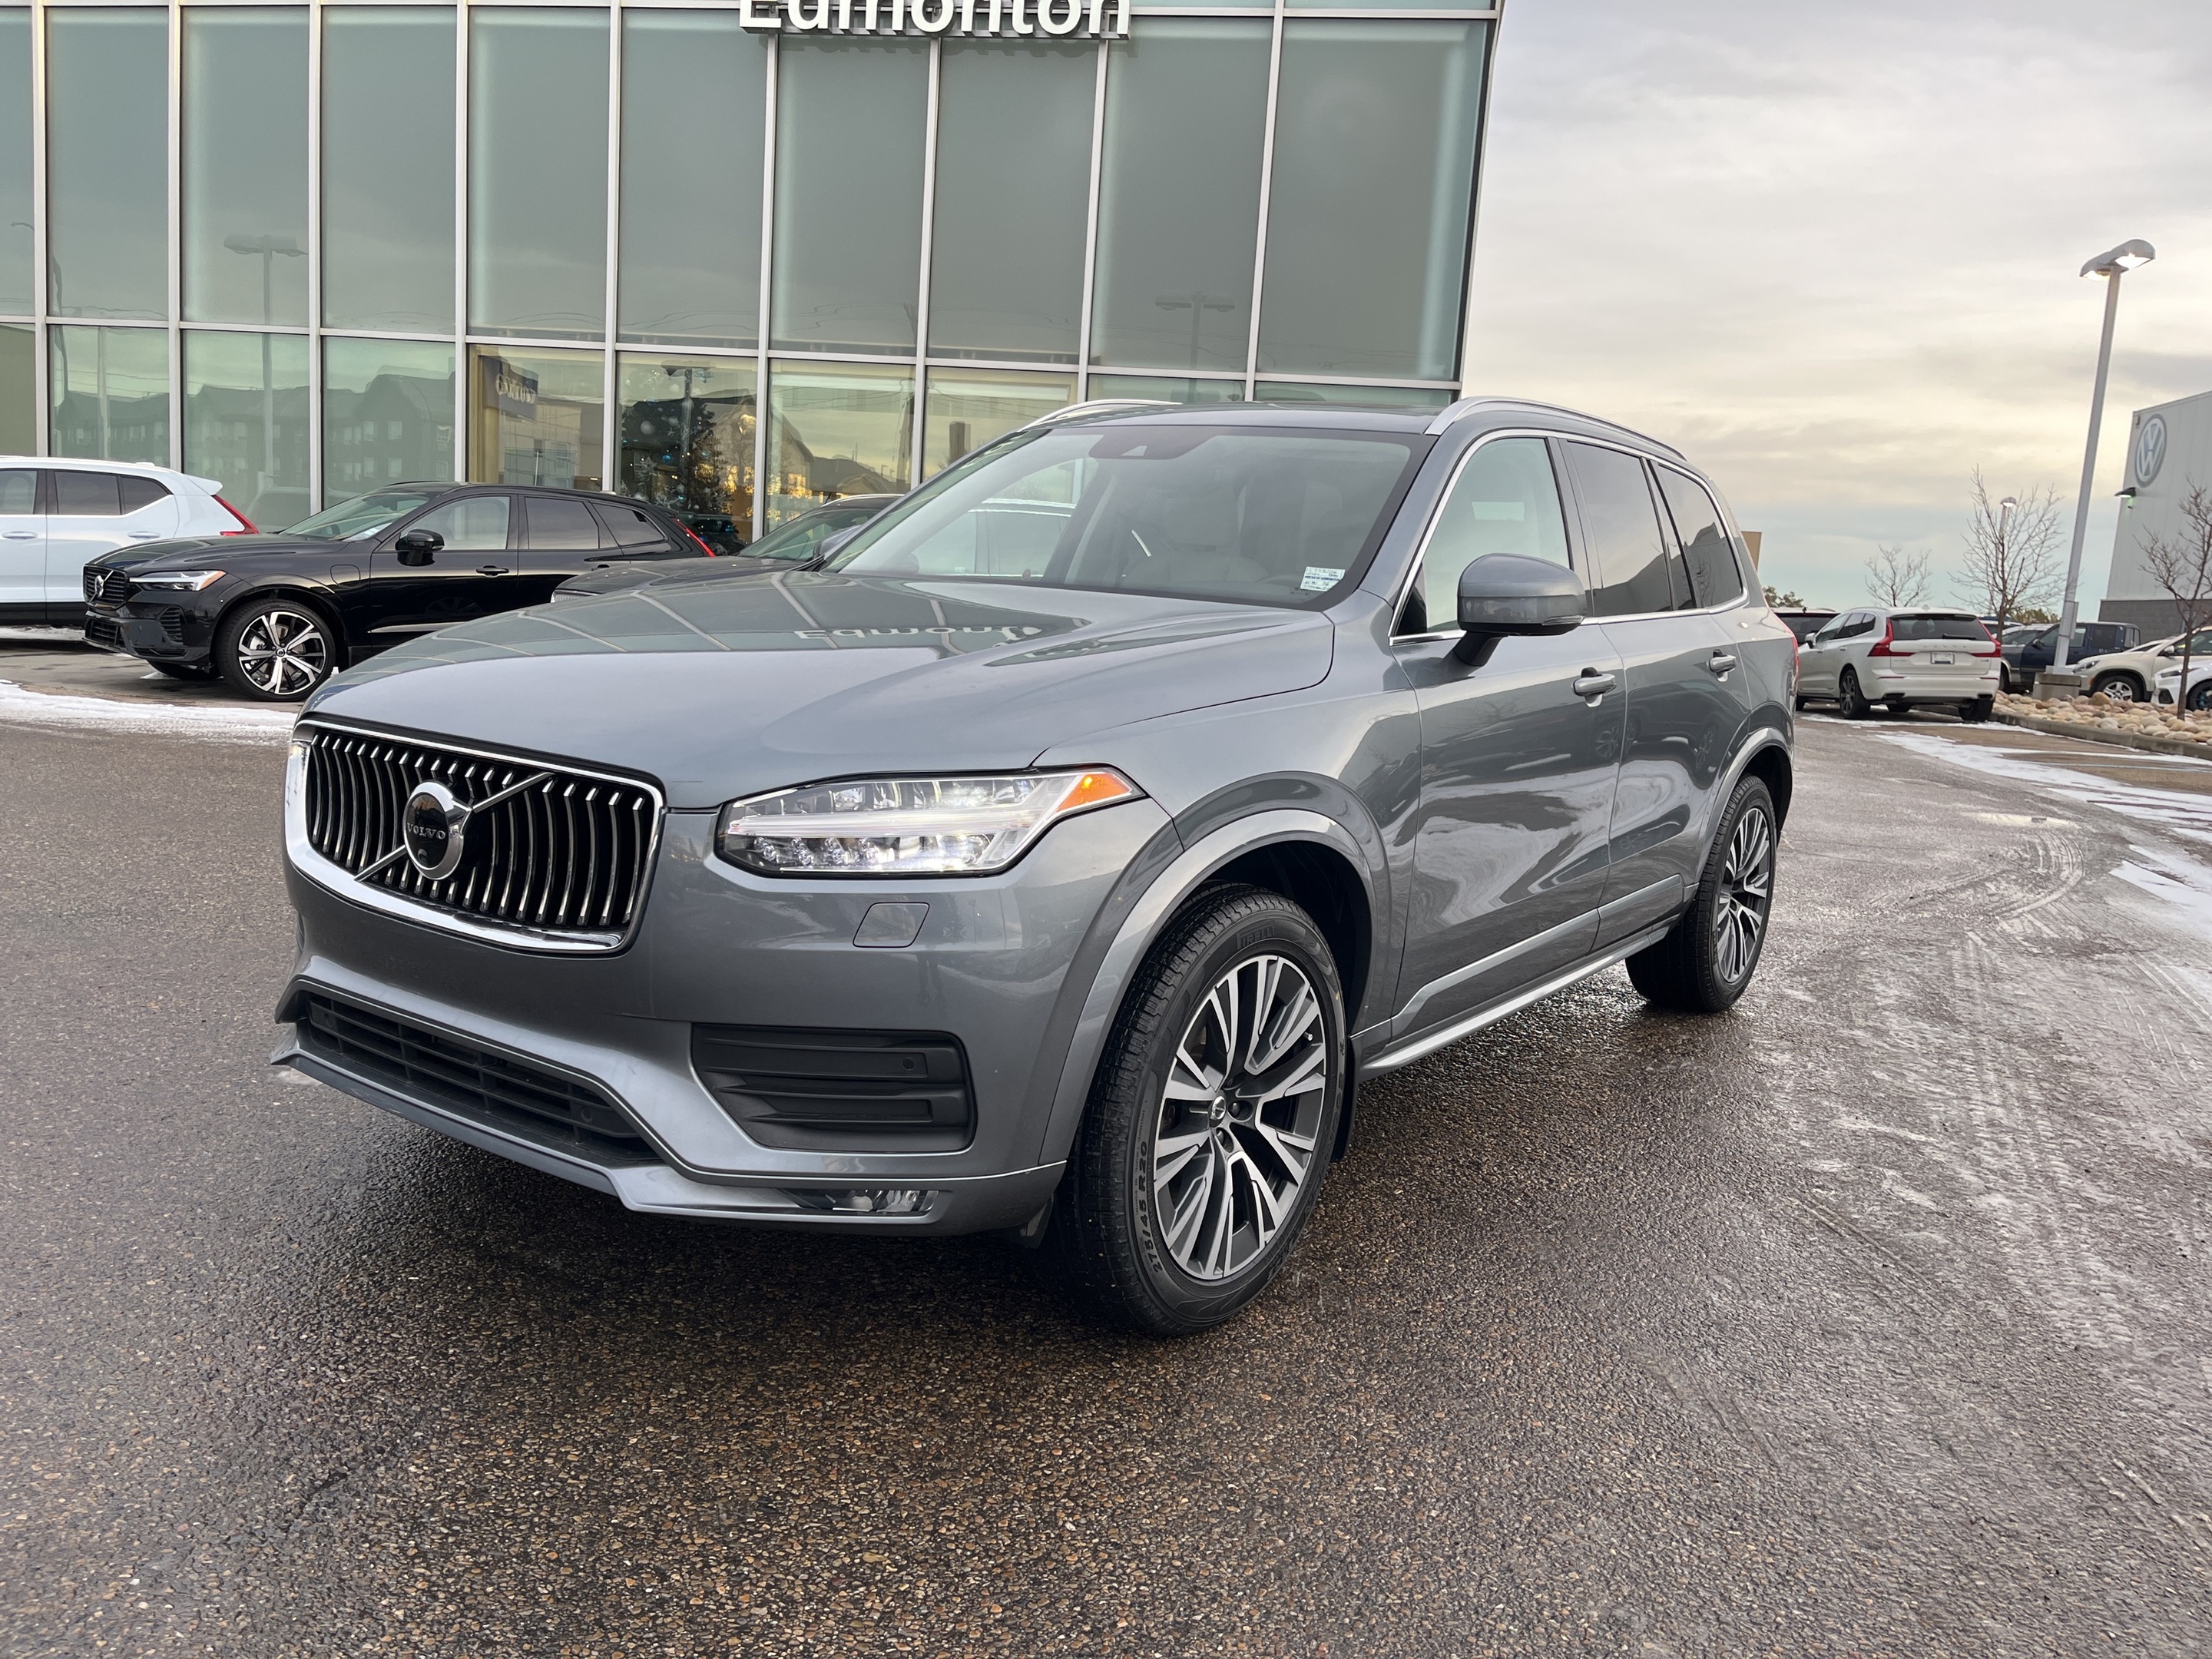 2020 Volvo XC90 T6 AWD Momentum (6-Seat) FROM 3.99%